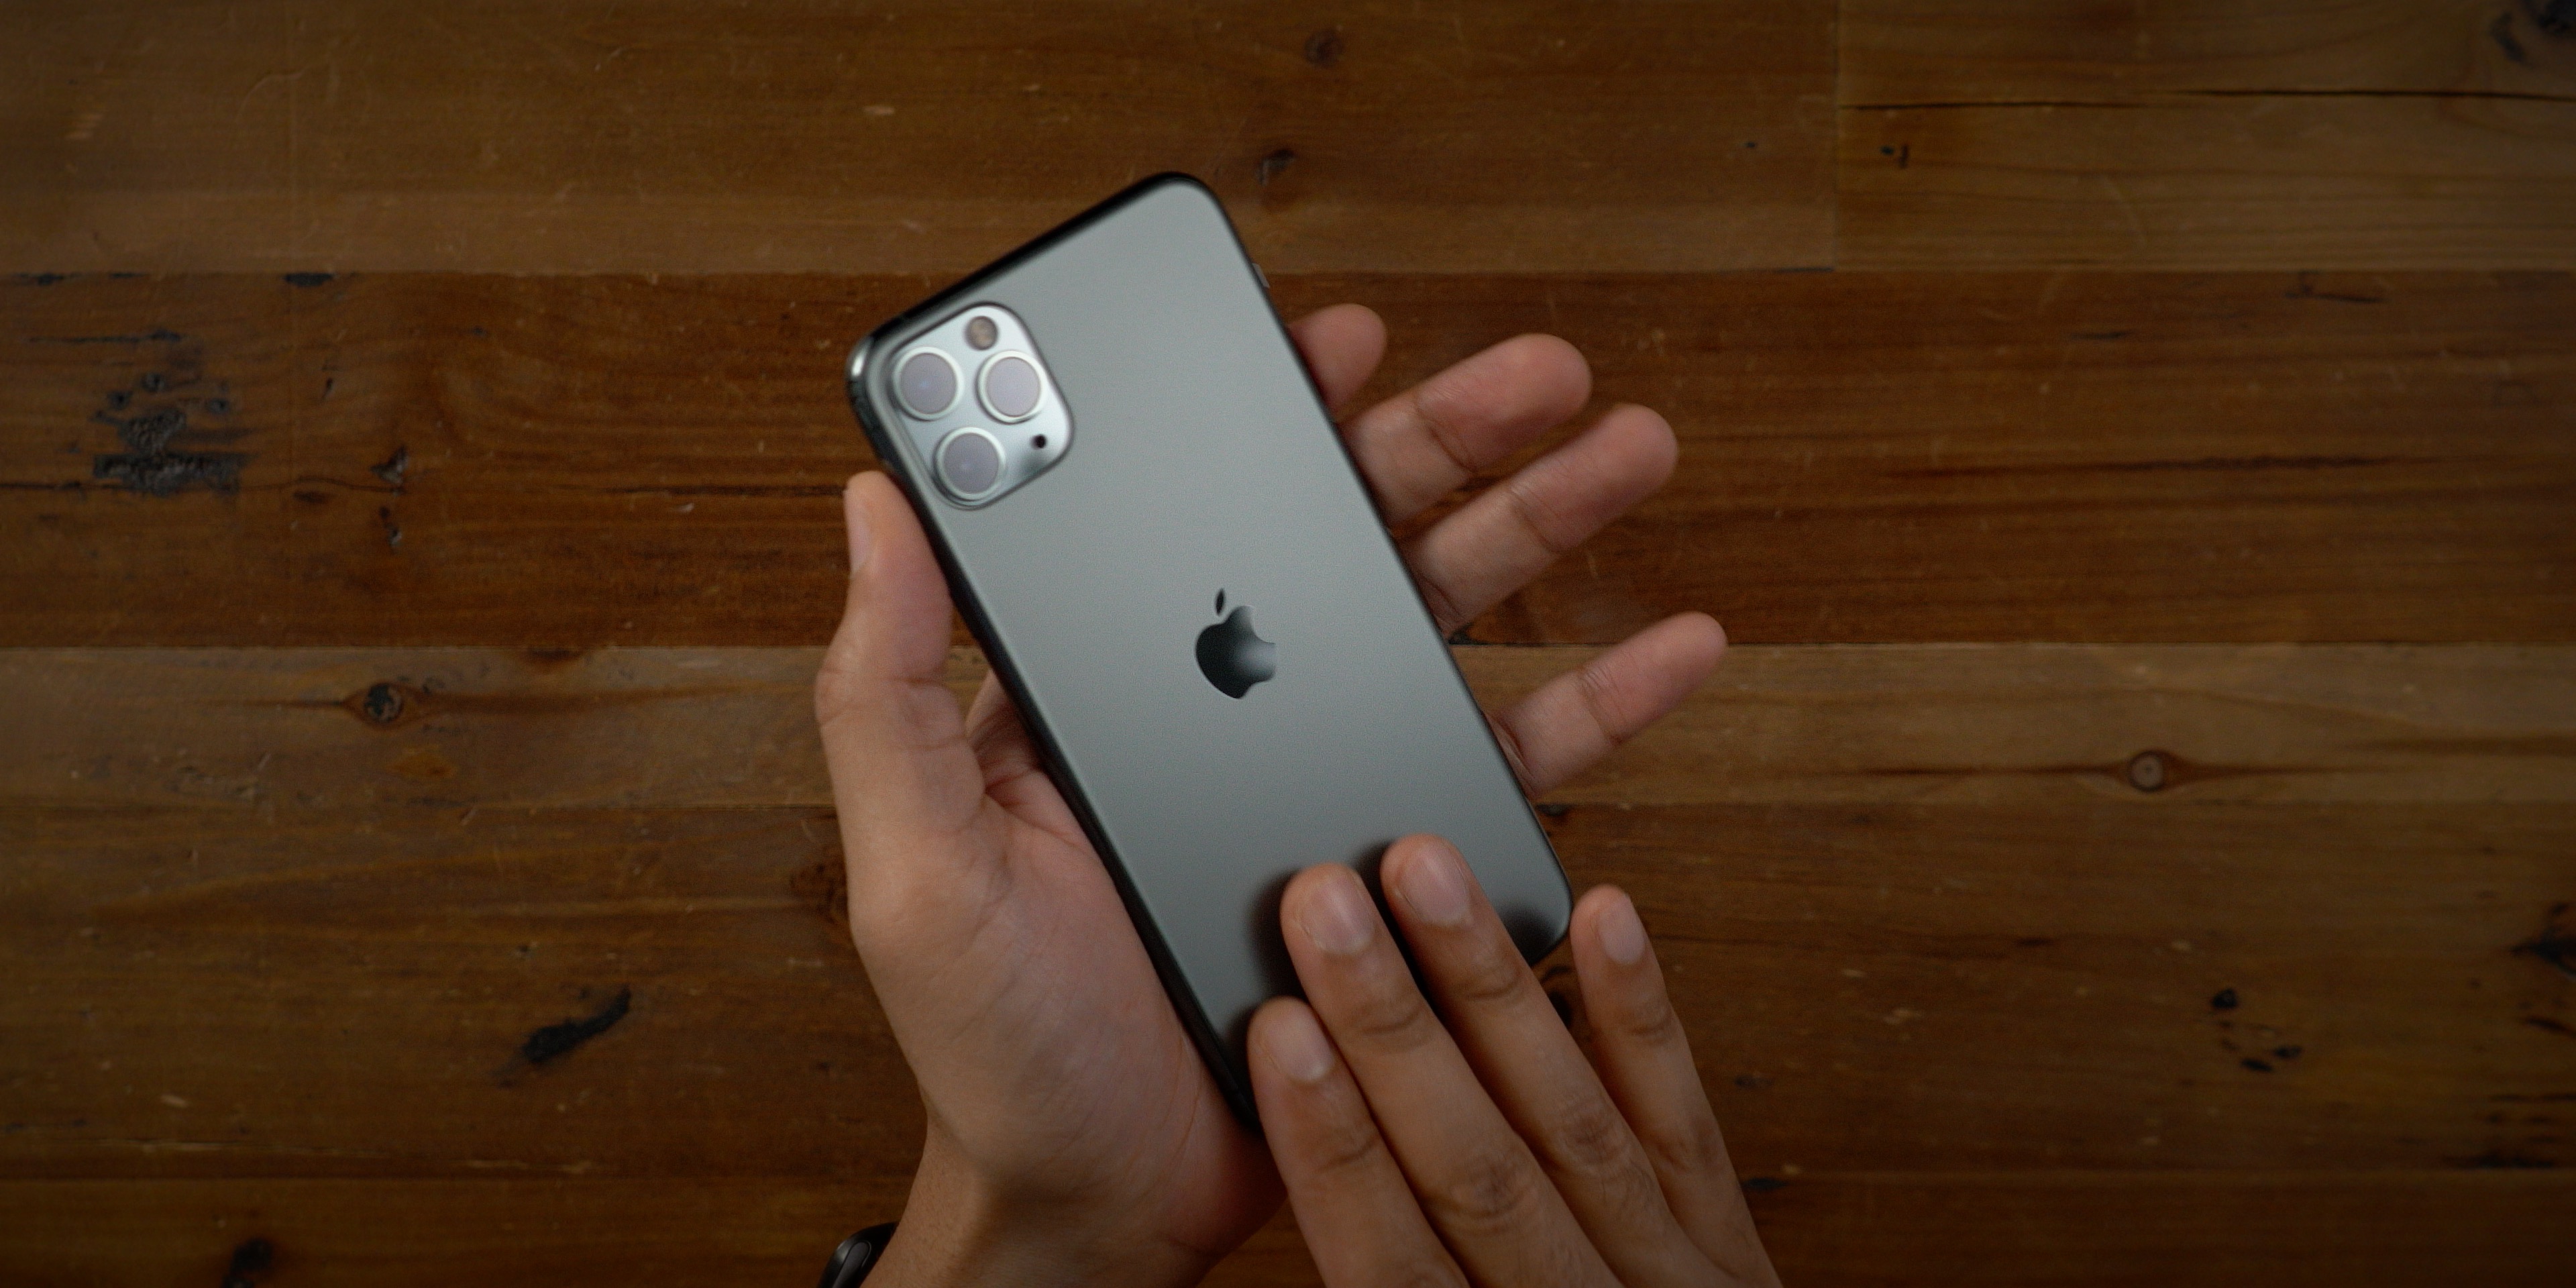 iPhone 11 Pro review: is it worth the significant price premium?